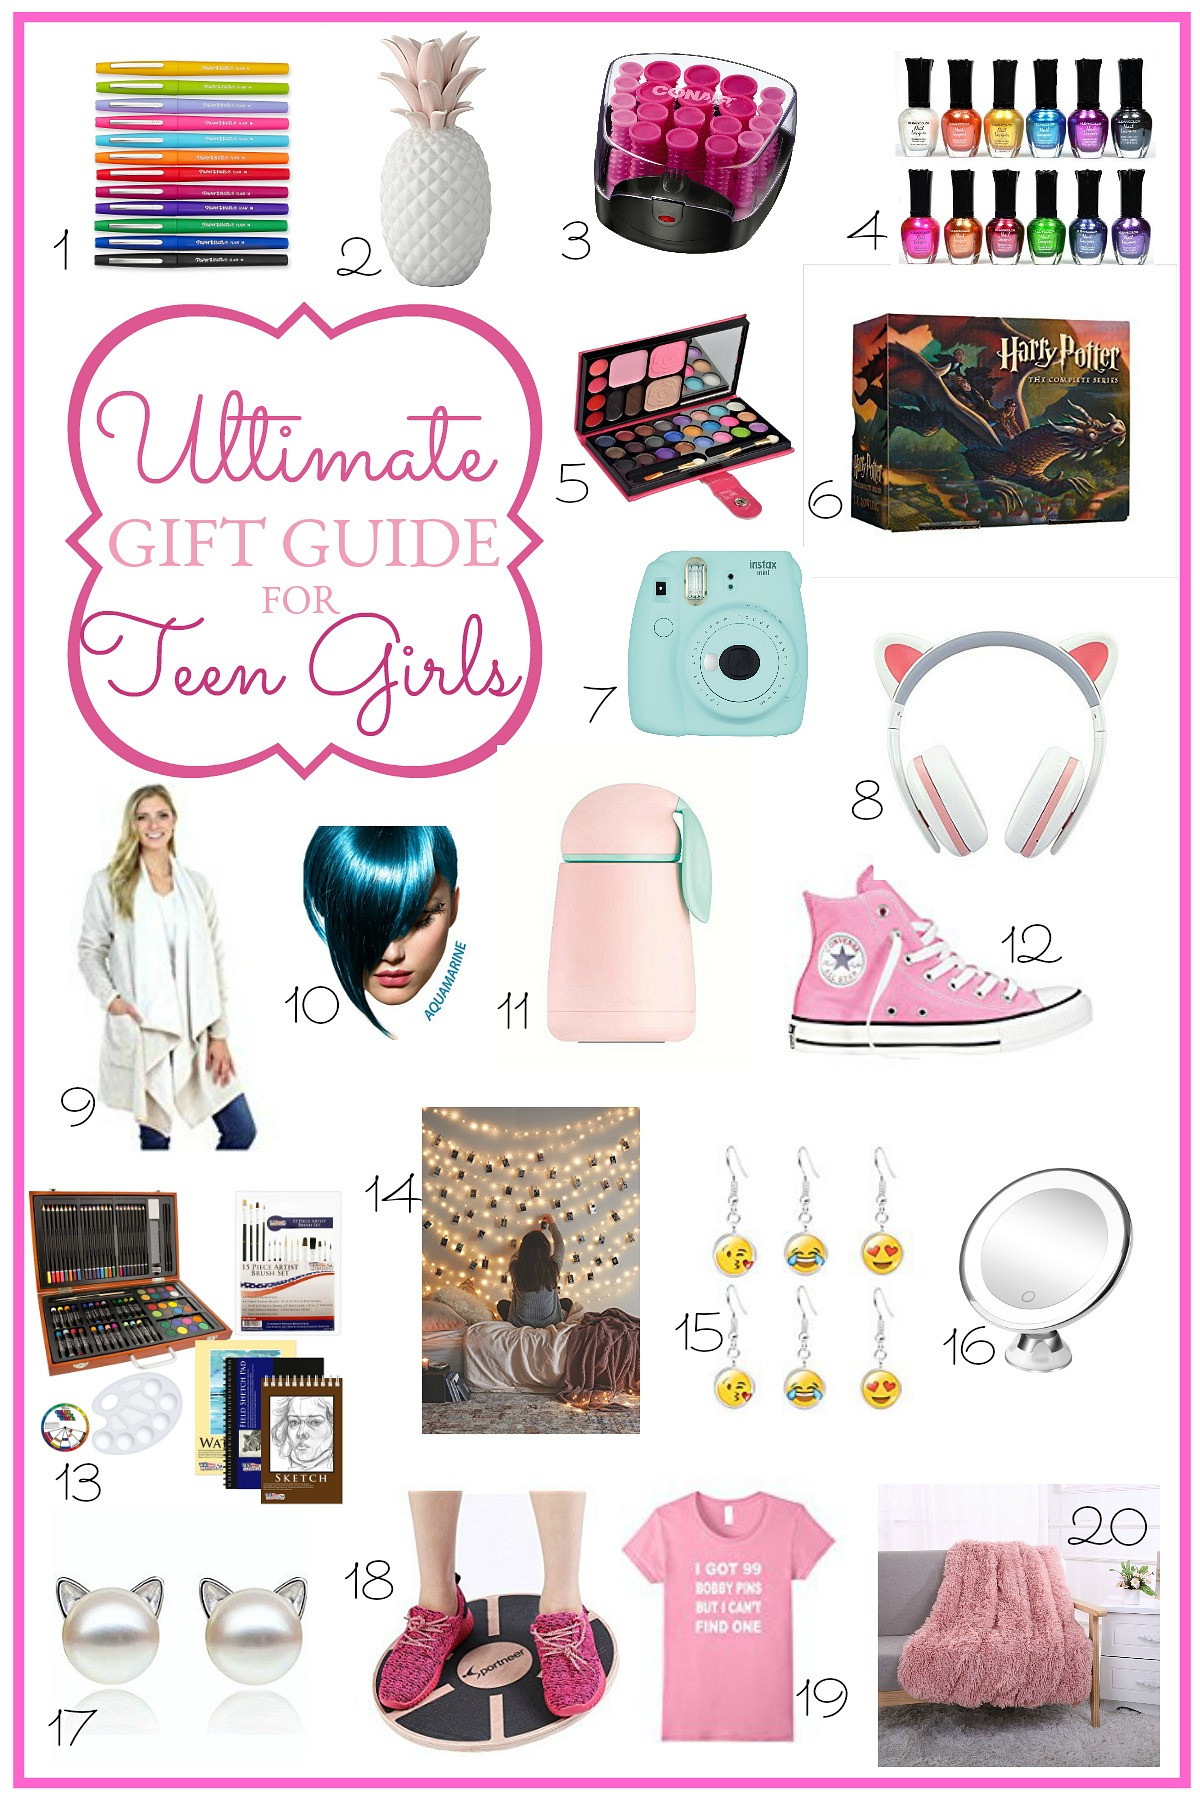 Cool Gift Ideas For Girls
 Ultimate Holiday Gift Guide for Teen Girls